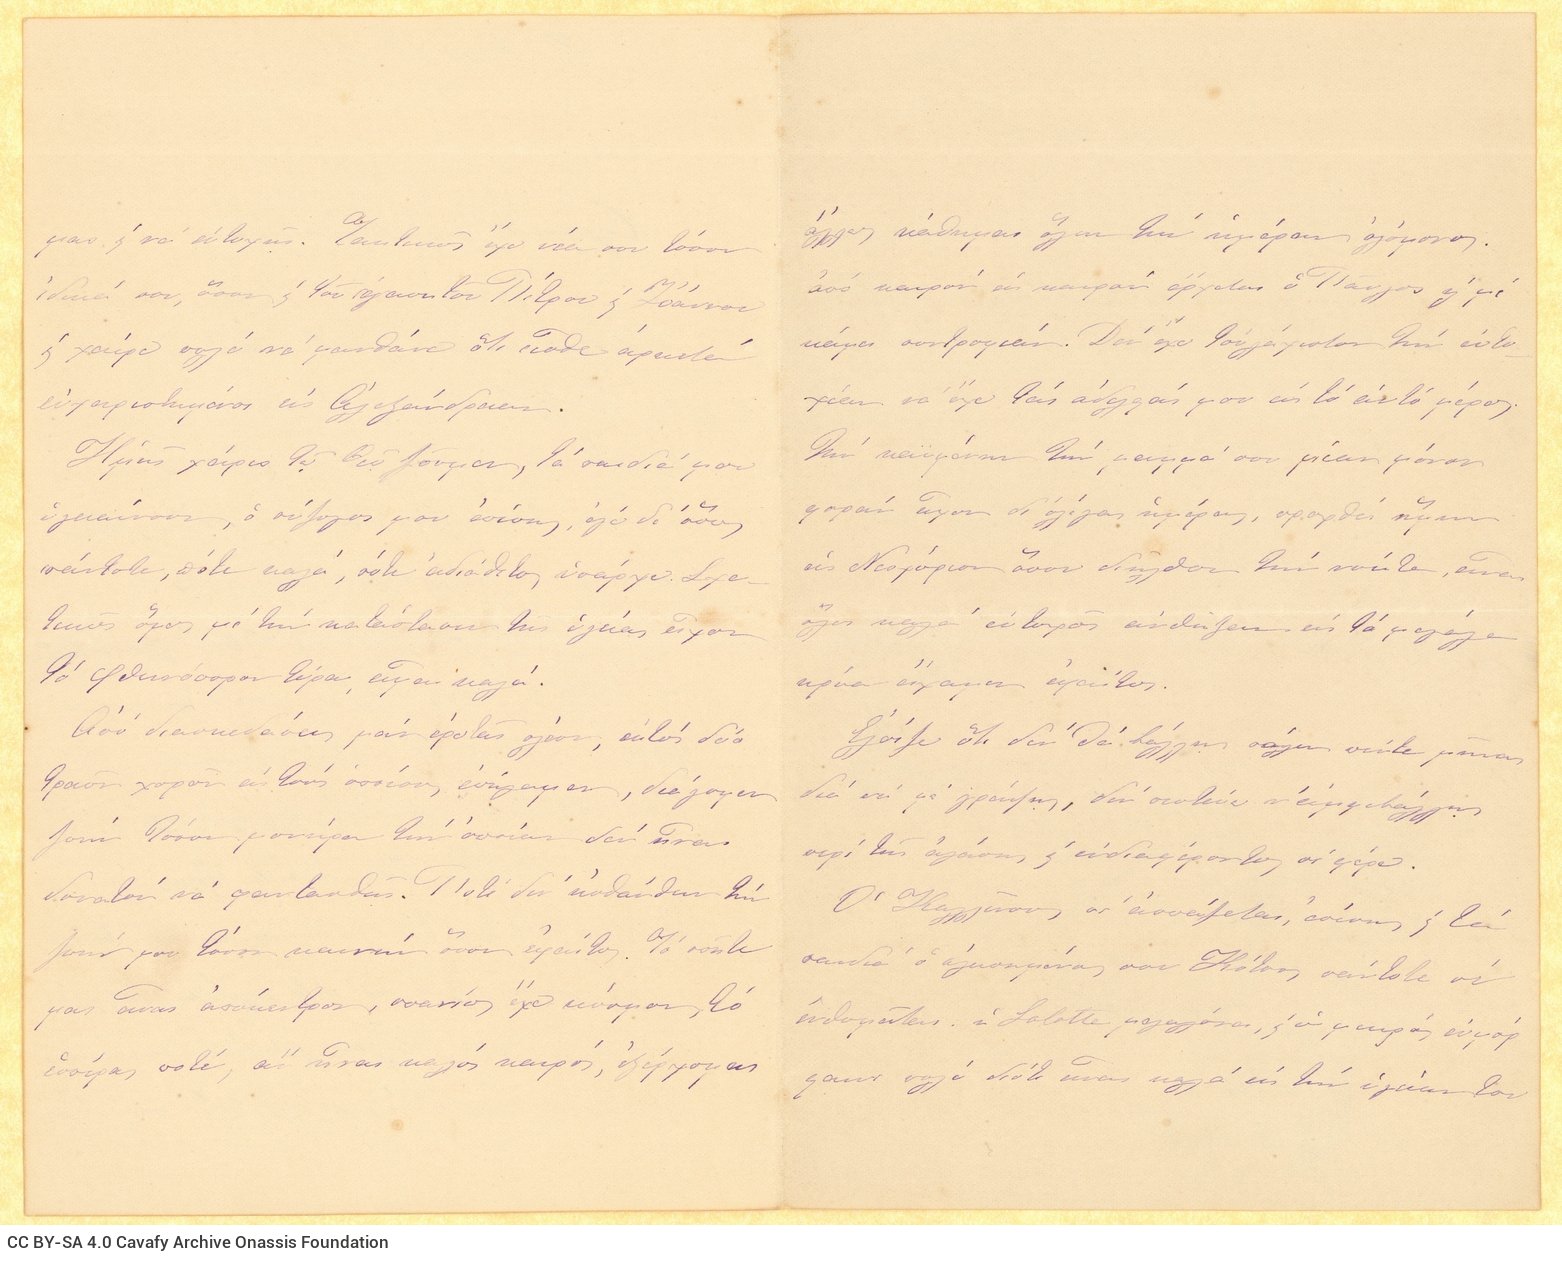 Handwritten letter by Amalia Callinus to Aristeidis Cavafy on all sides of a bifolio. The author expresses her love for her n